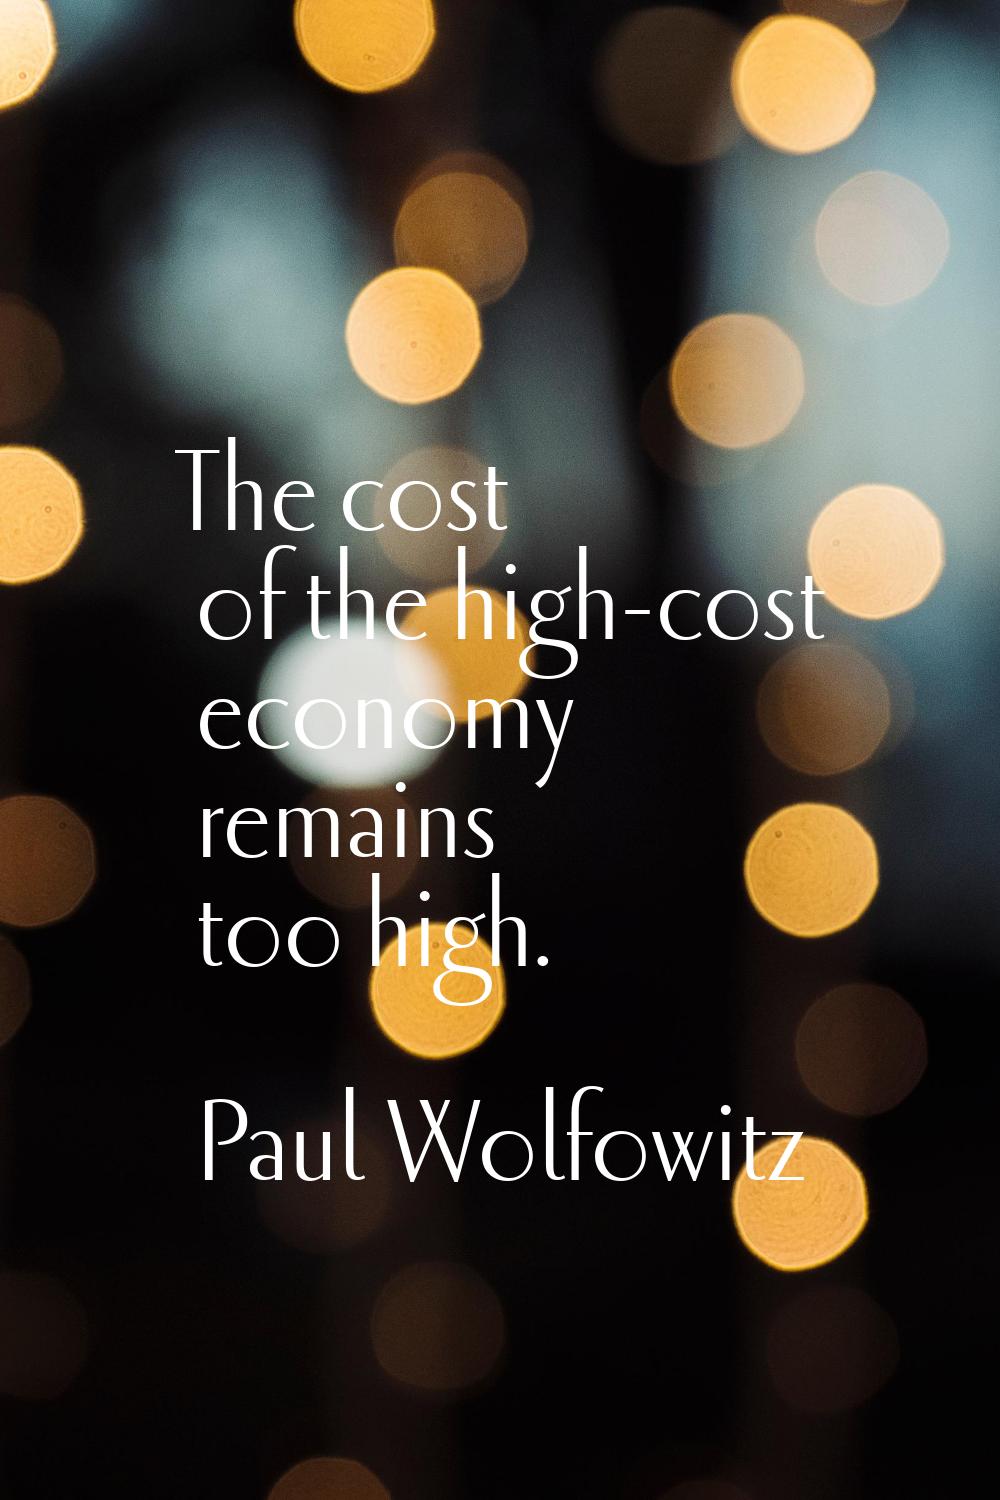 The cost of the high-cost economy remains too high.